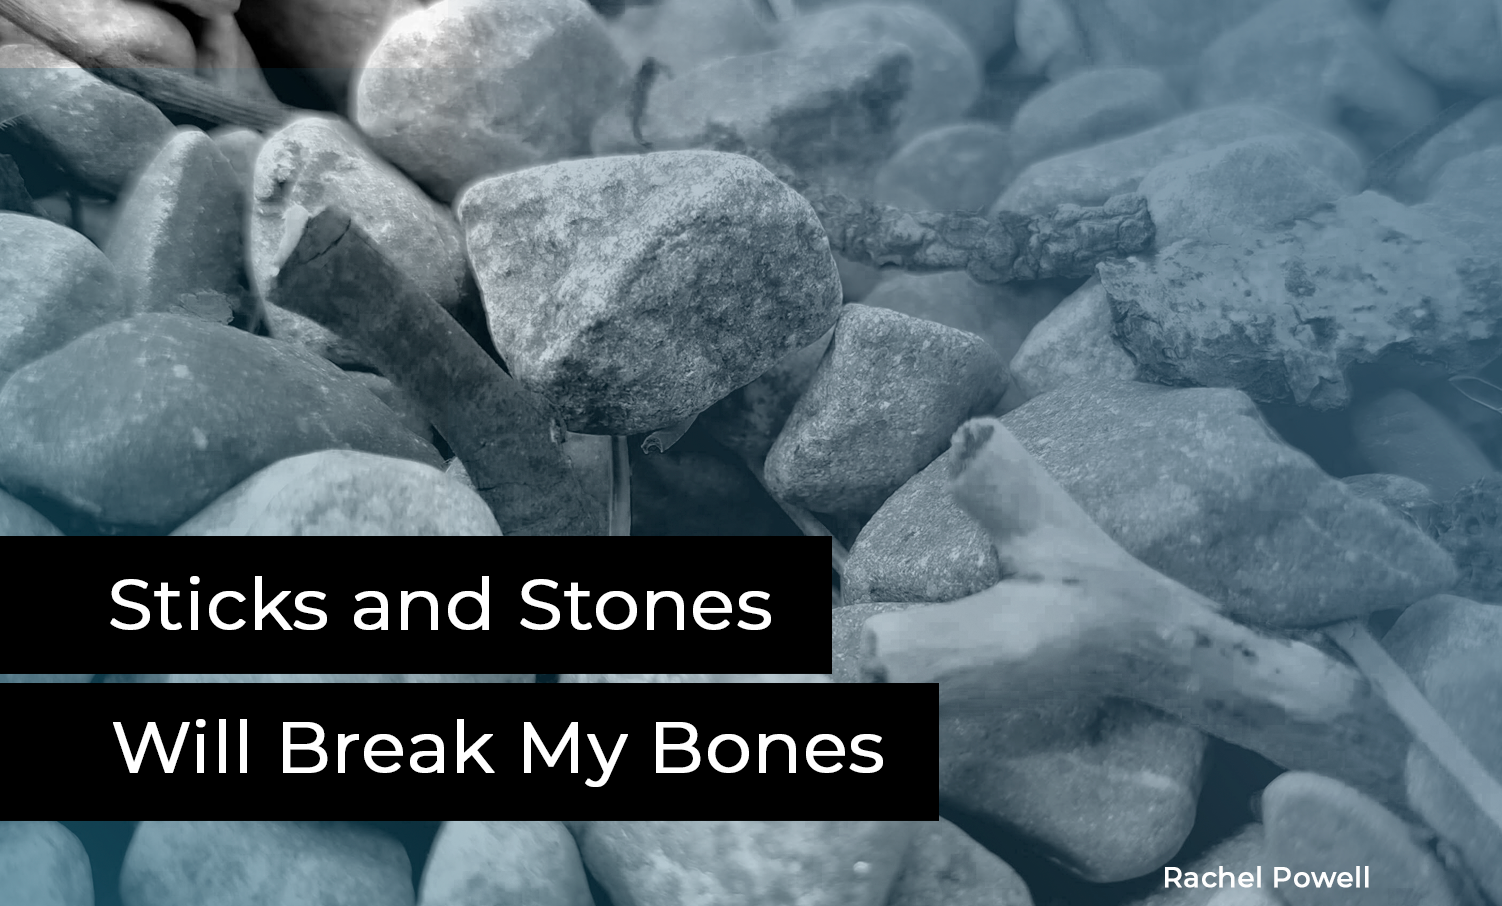 Sticks and stones will break your bone with photo of sticks and stones.